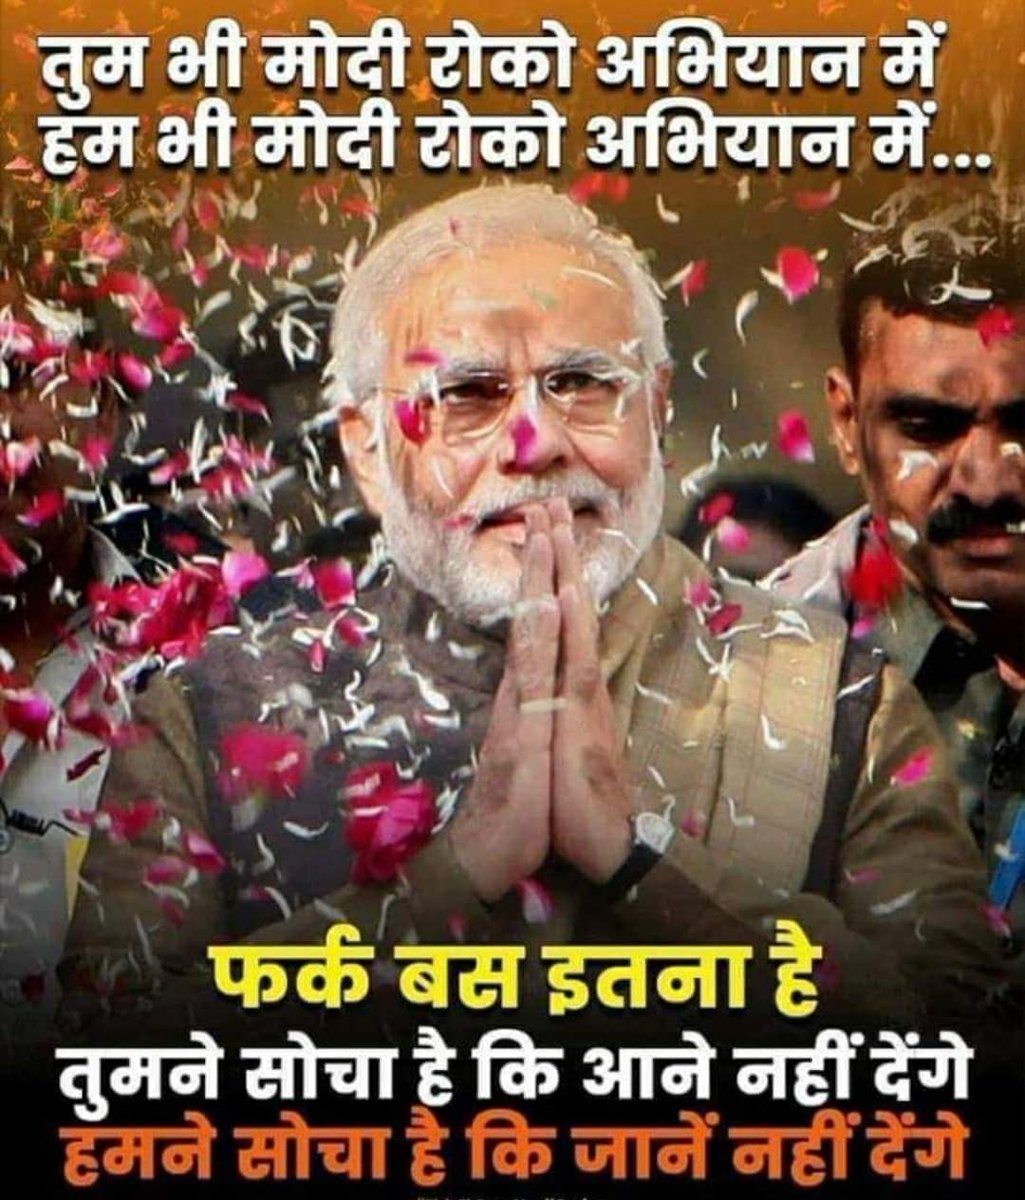 Modi ji's leadership brings stability, development, and a strong stance on national security issues with initiatives aimed at economic growth, infrastructure development, and social welfare programs. #Vote4Development #Vote4Modi